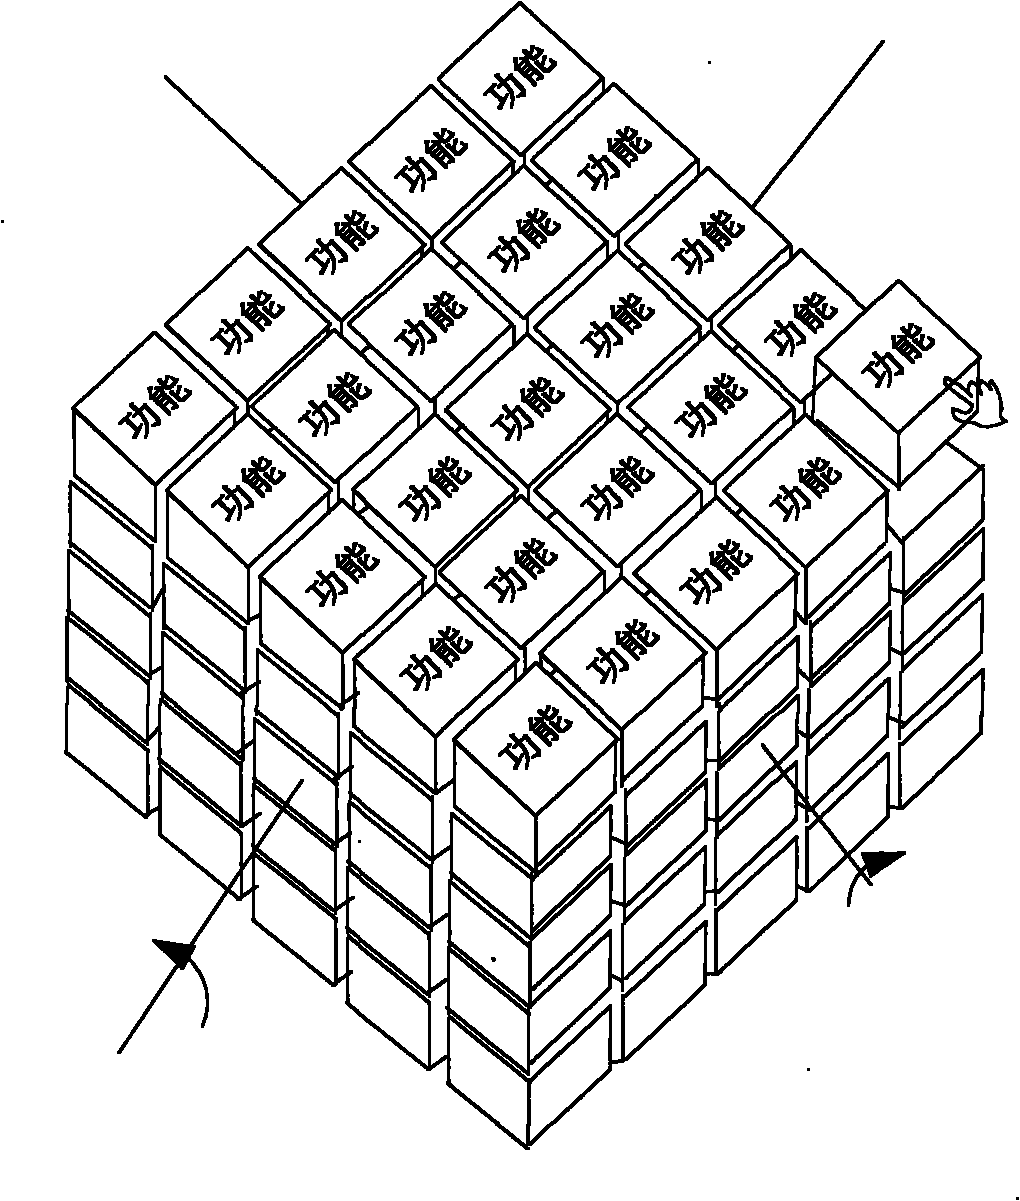 Display method and system of television (TV) menu